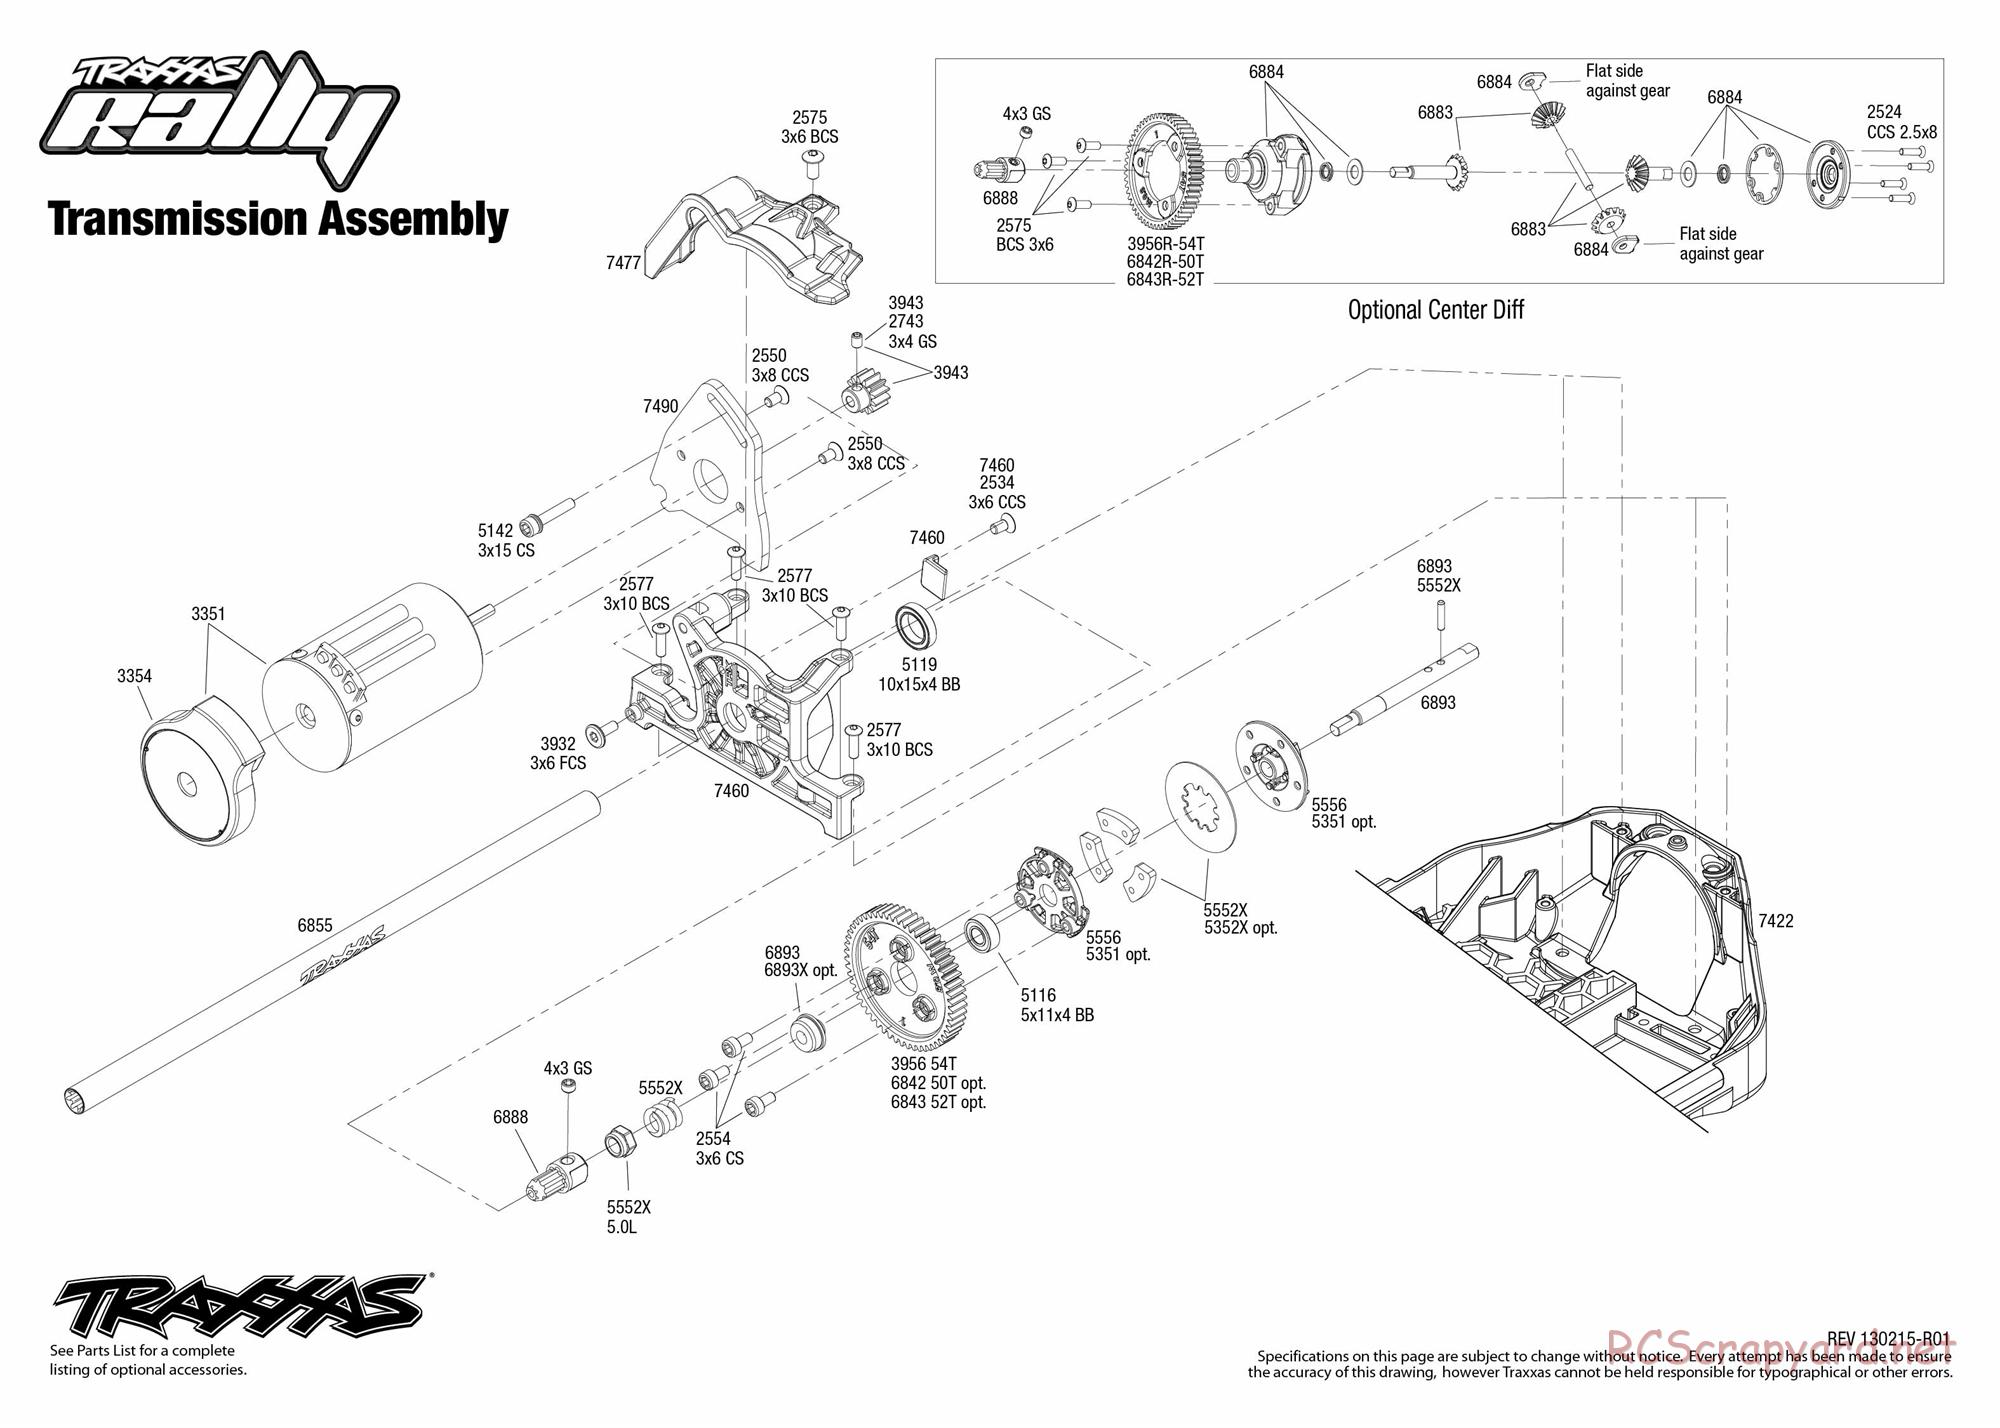 Traxxas - Rally (2012) - Exploded Views - Page 5